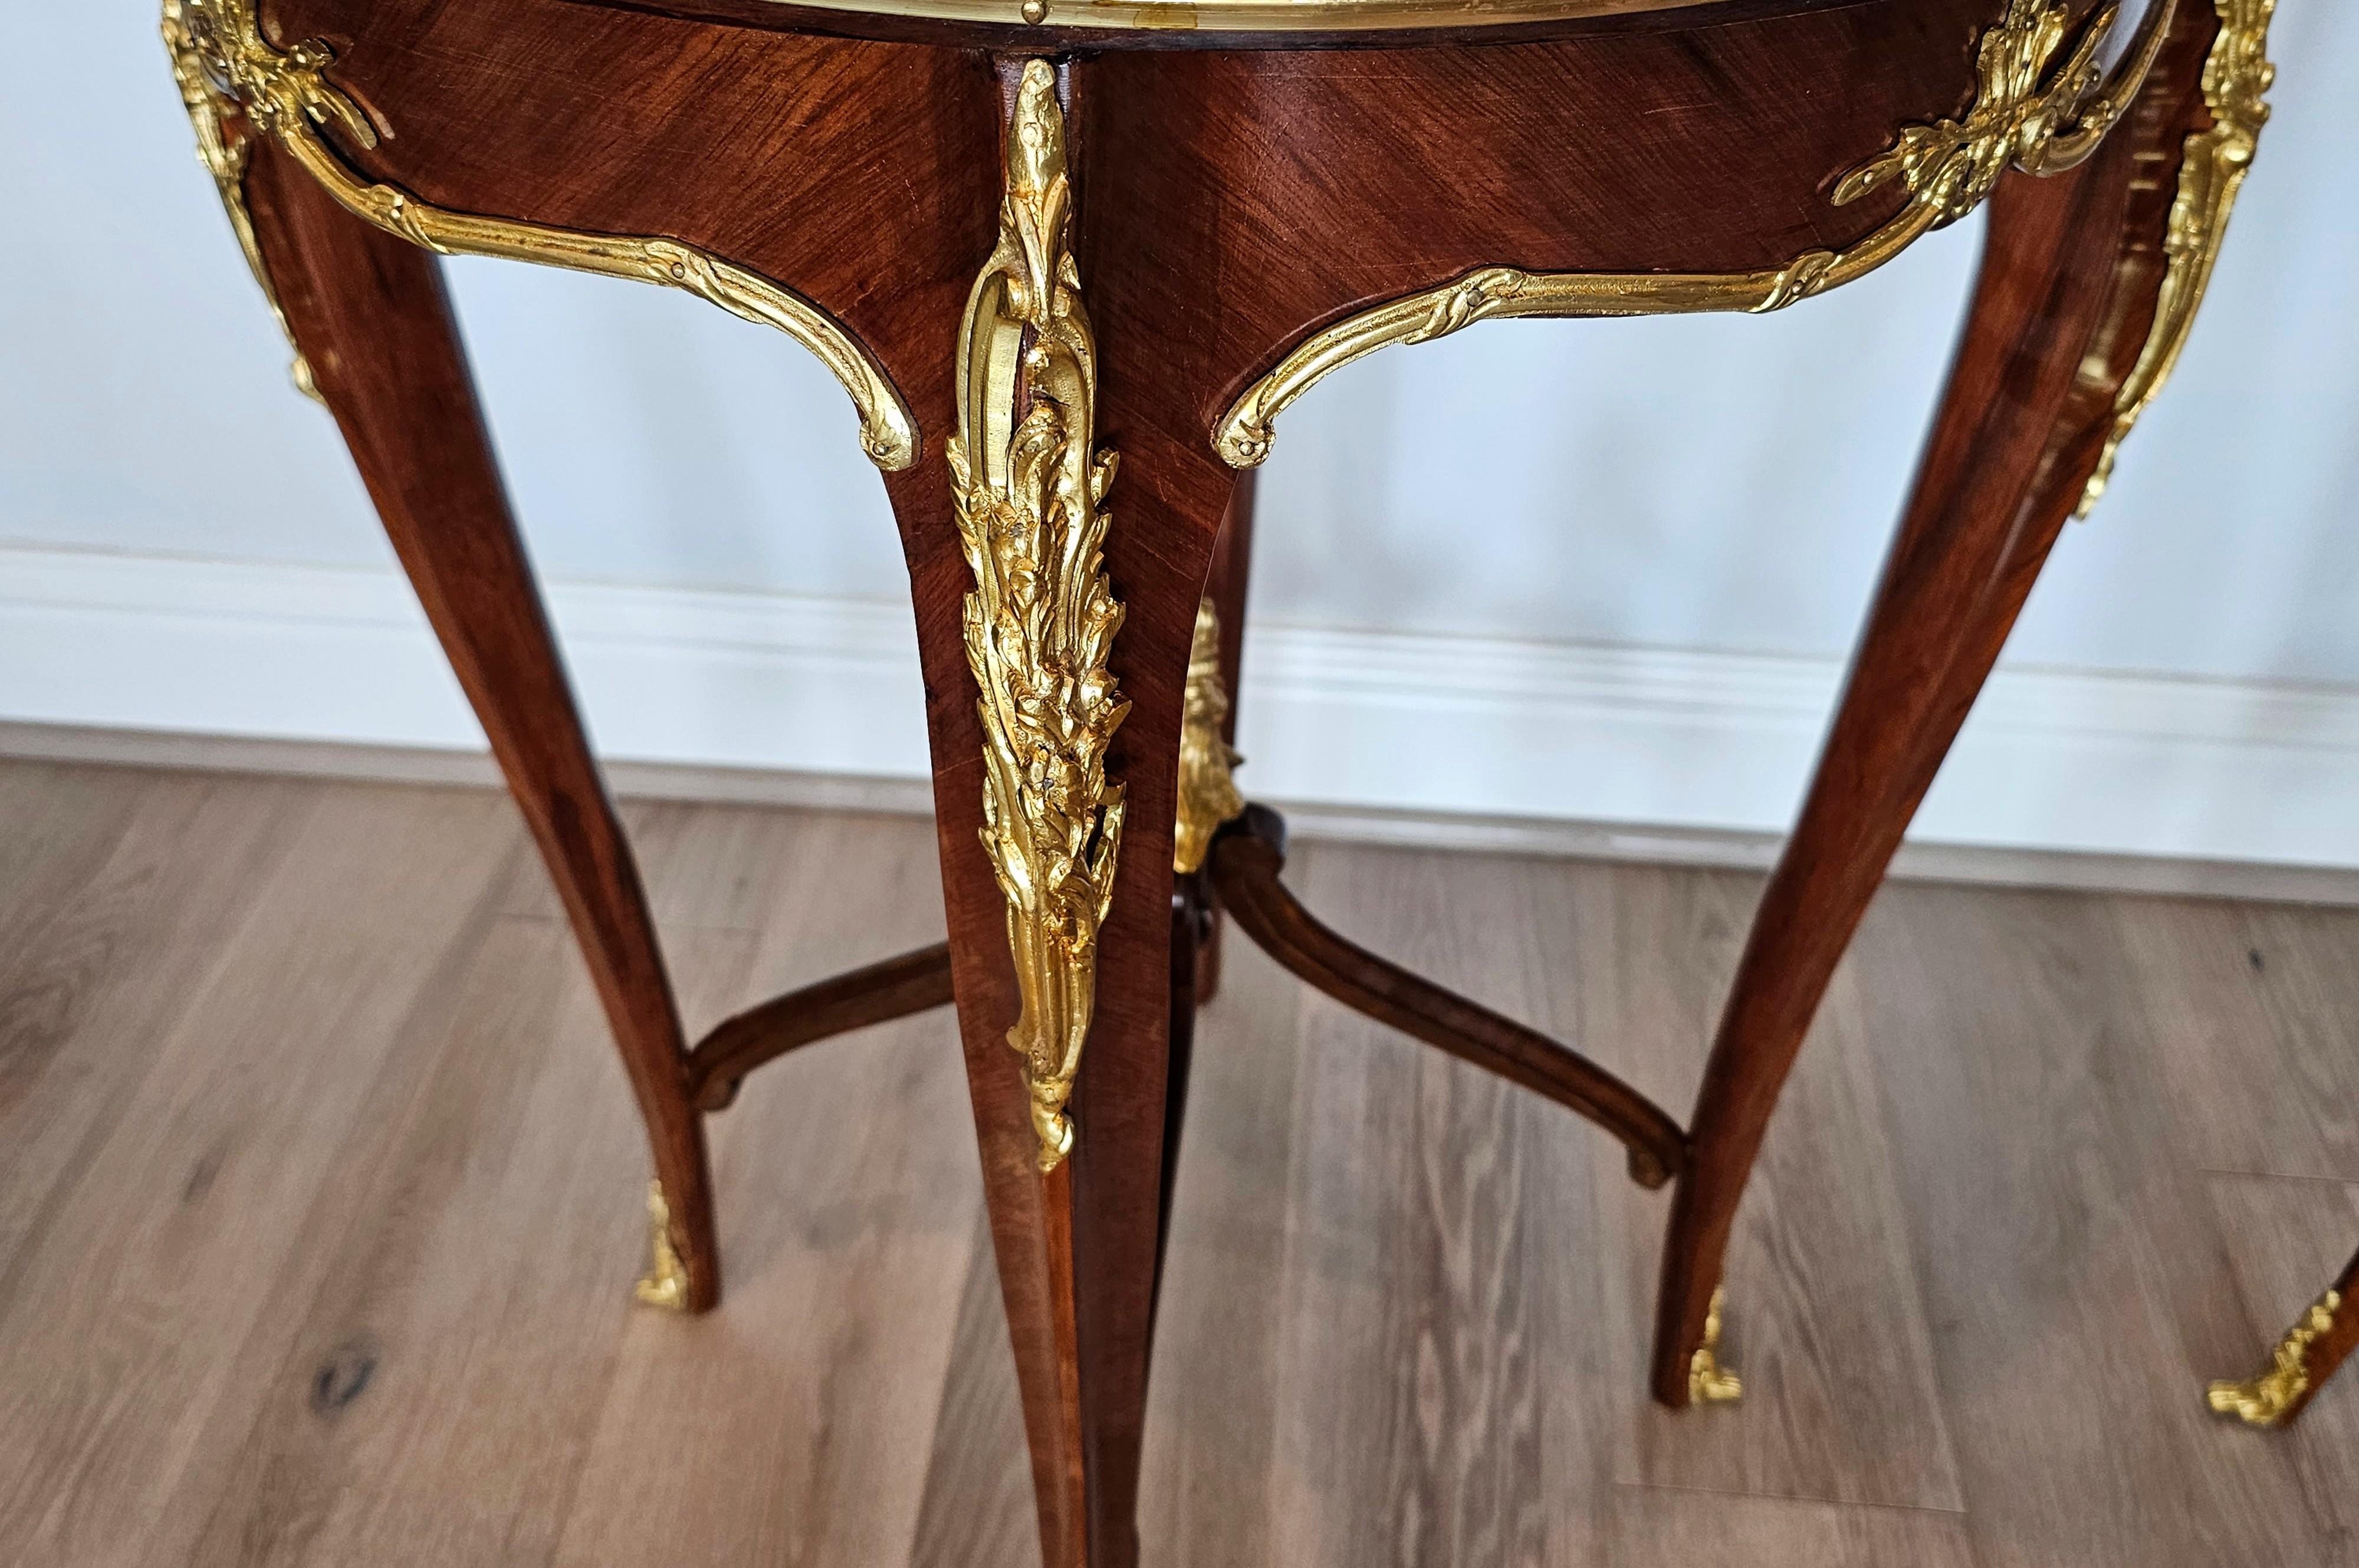 Pair of French Louis XV Style Gilt Bronze Mounted Kingwood Side Tables For Sale 13